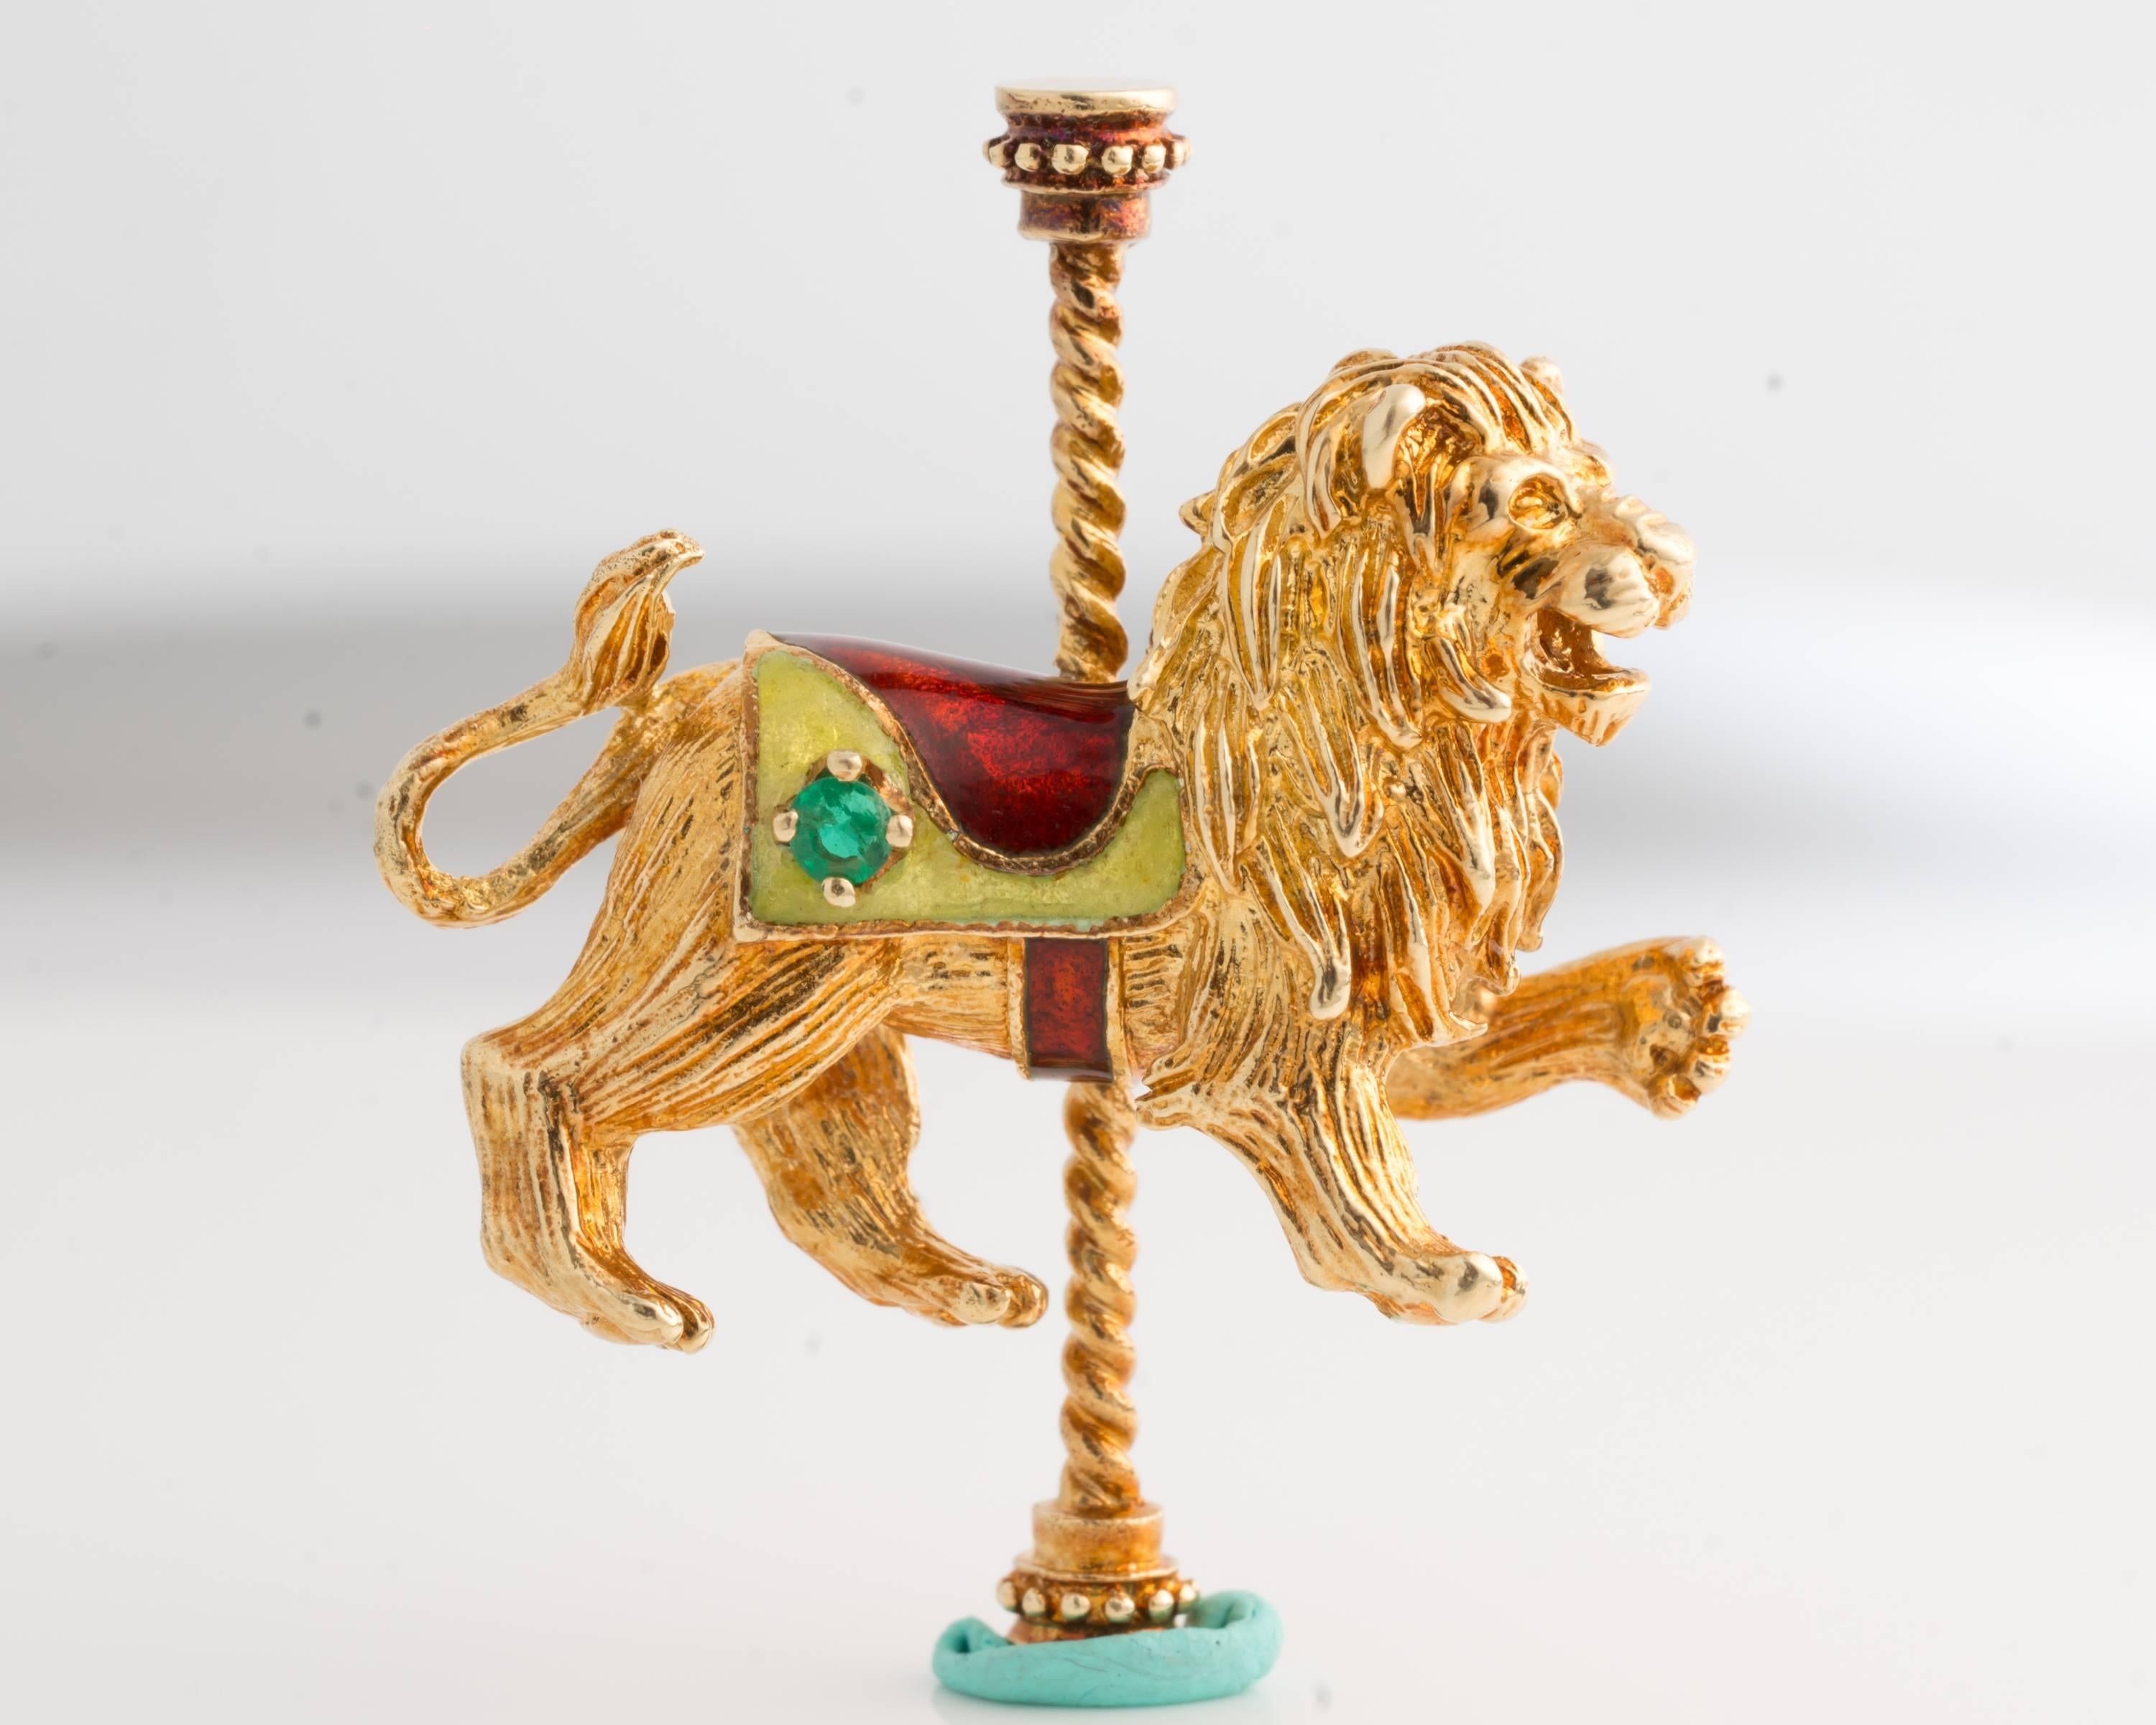 1979 Royal Roaring Carousel Lion Brooch Pin - 14K Yellow Gold, Emerald, Enamel

Features a Roaring Royal Gold Lion with Outstretched Paw, Enamel Saddle and an Emerald Accent. 
This exquisitely detailed Lion is carefully crafted from rich 14K Yellow